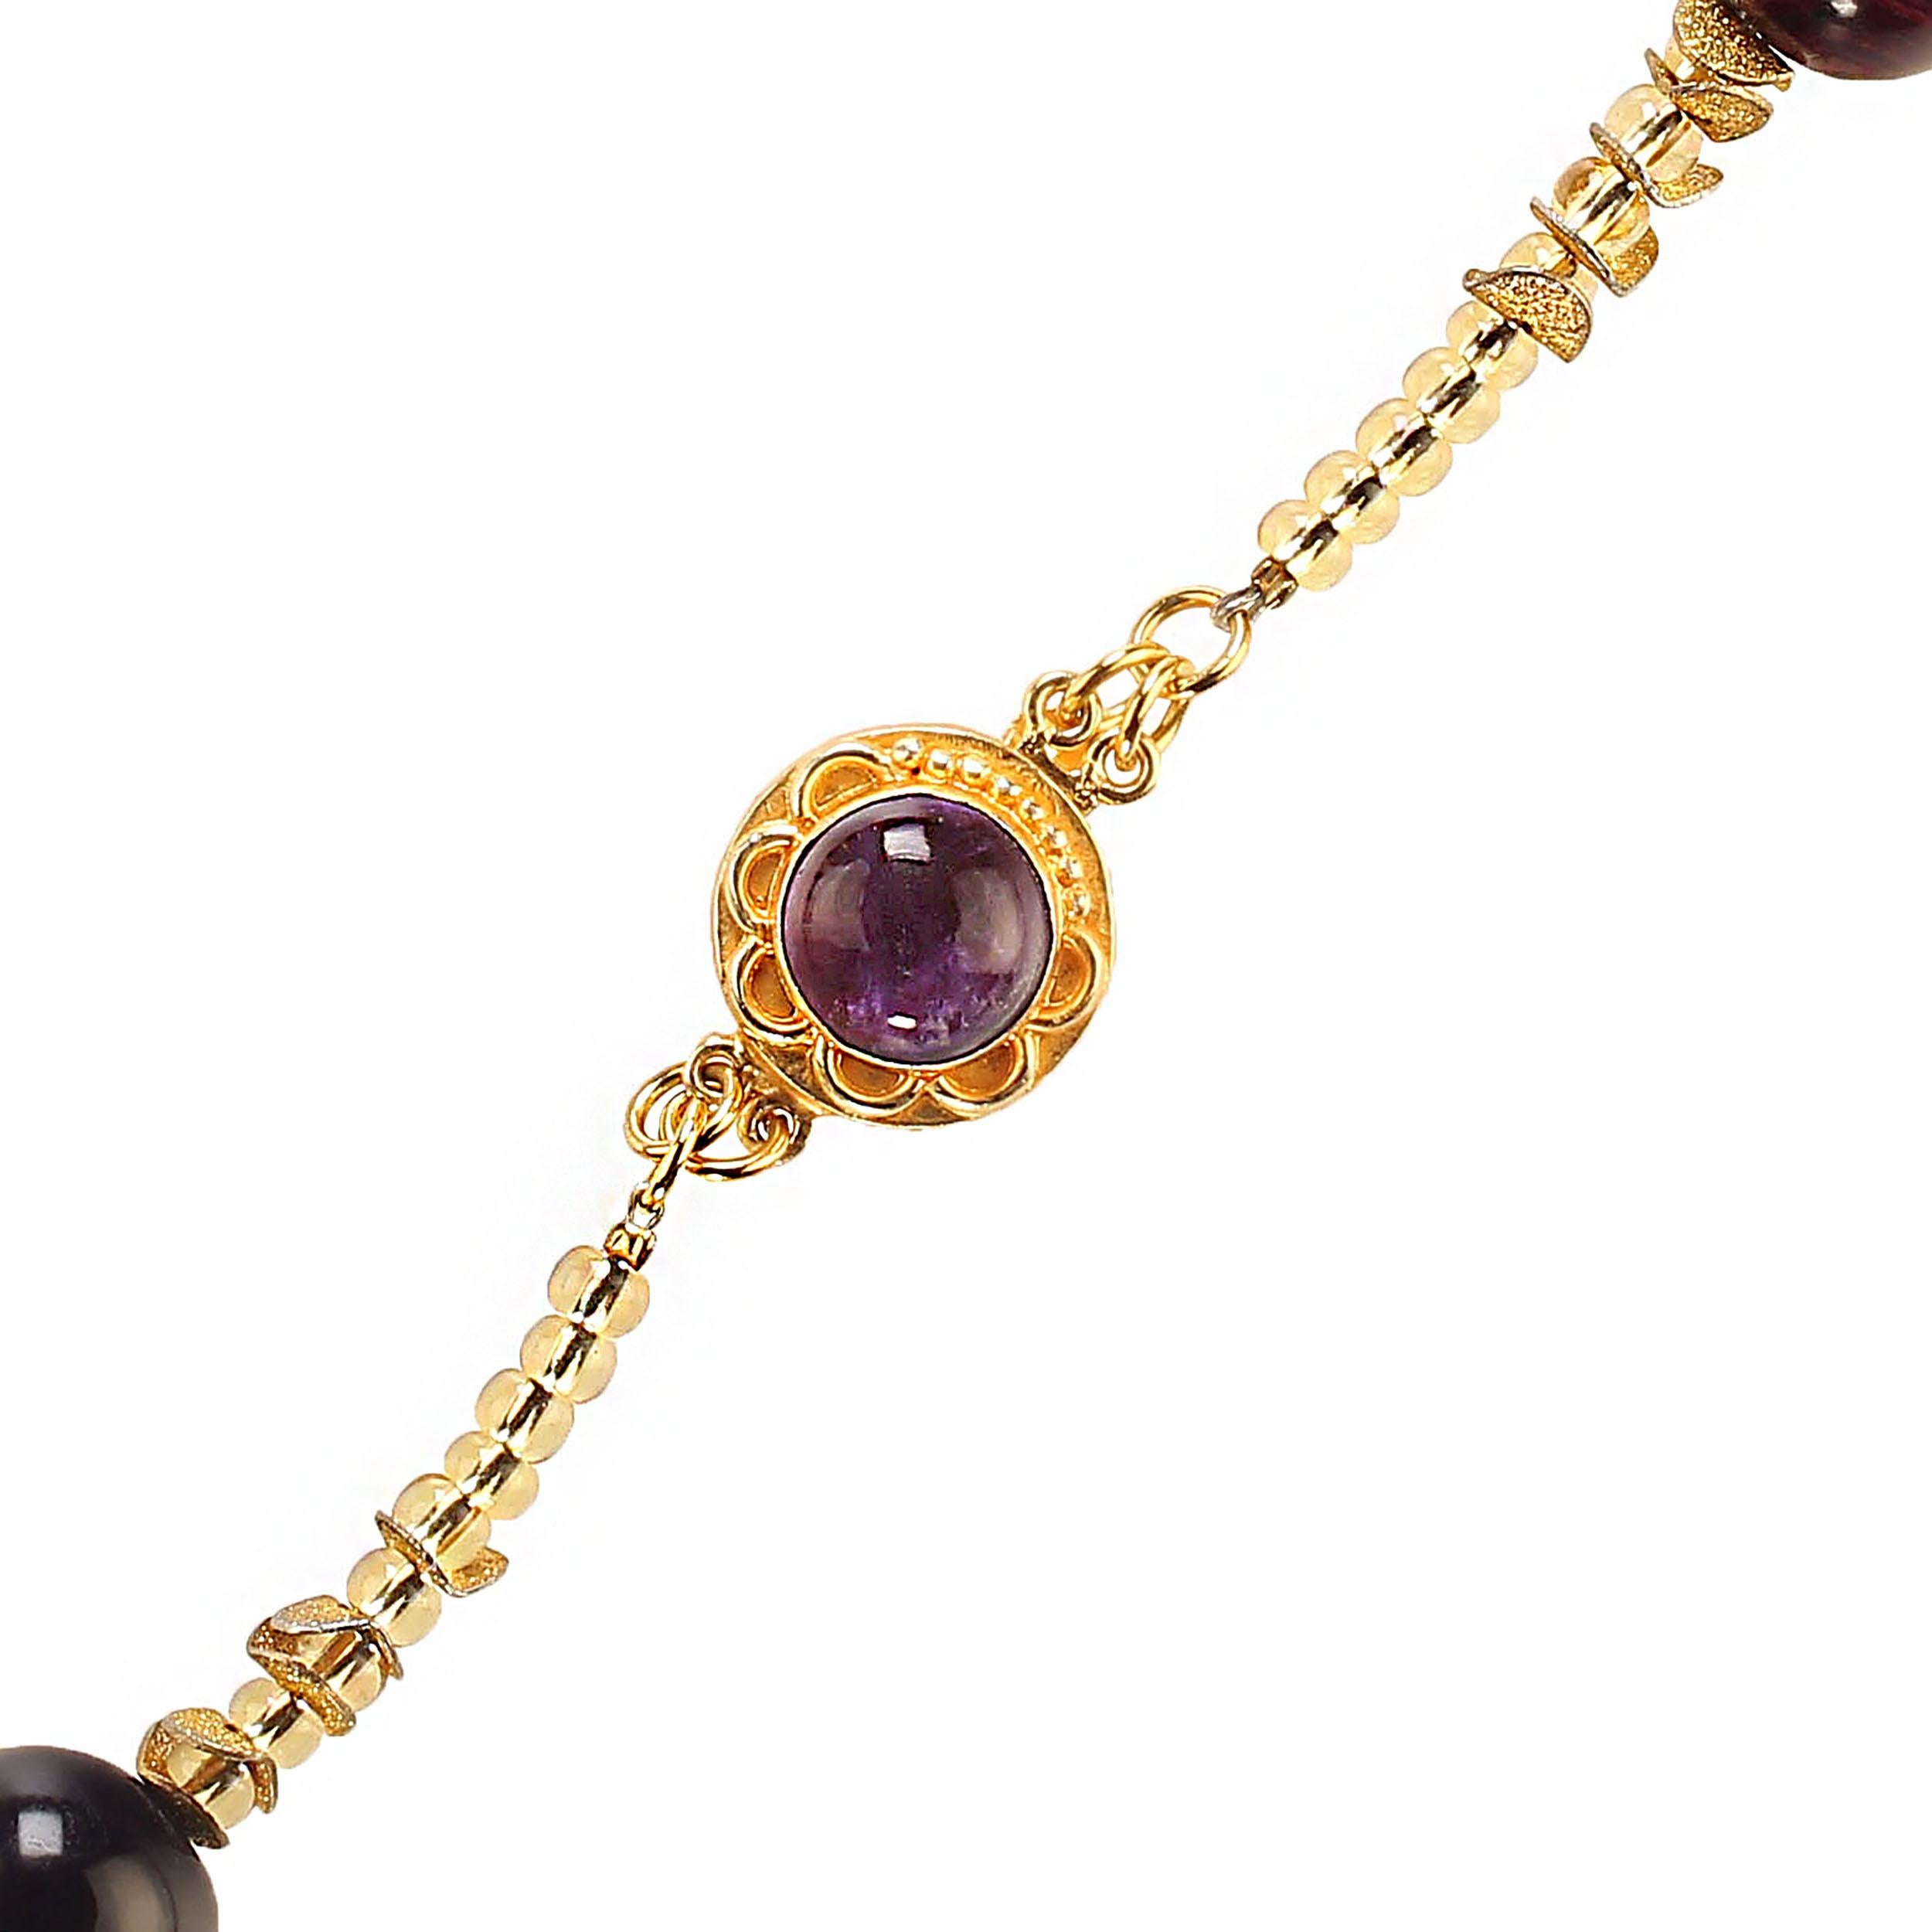 Custom made, highly polished 16mm spheres of Amethyst, brushed wavy gold tone accents, and gold Czech bead necklace.  Statement necklace of February's Favorite gemstone, Amethyst!  This unique 23-inch necklace sits beautifully on any ensemble.  The